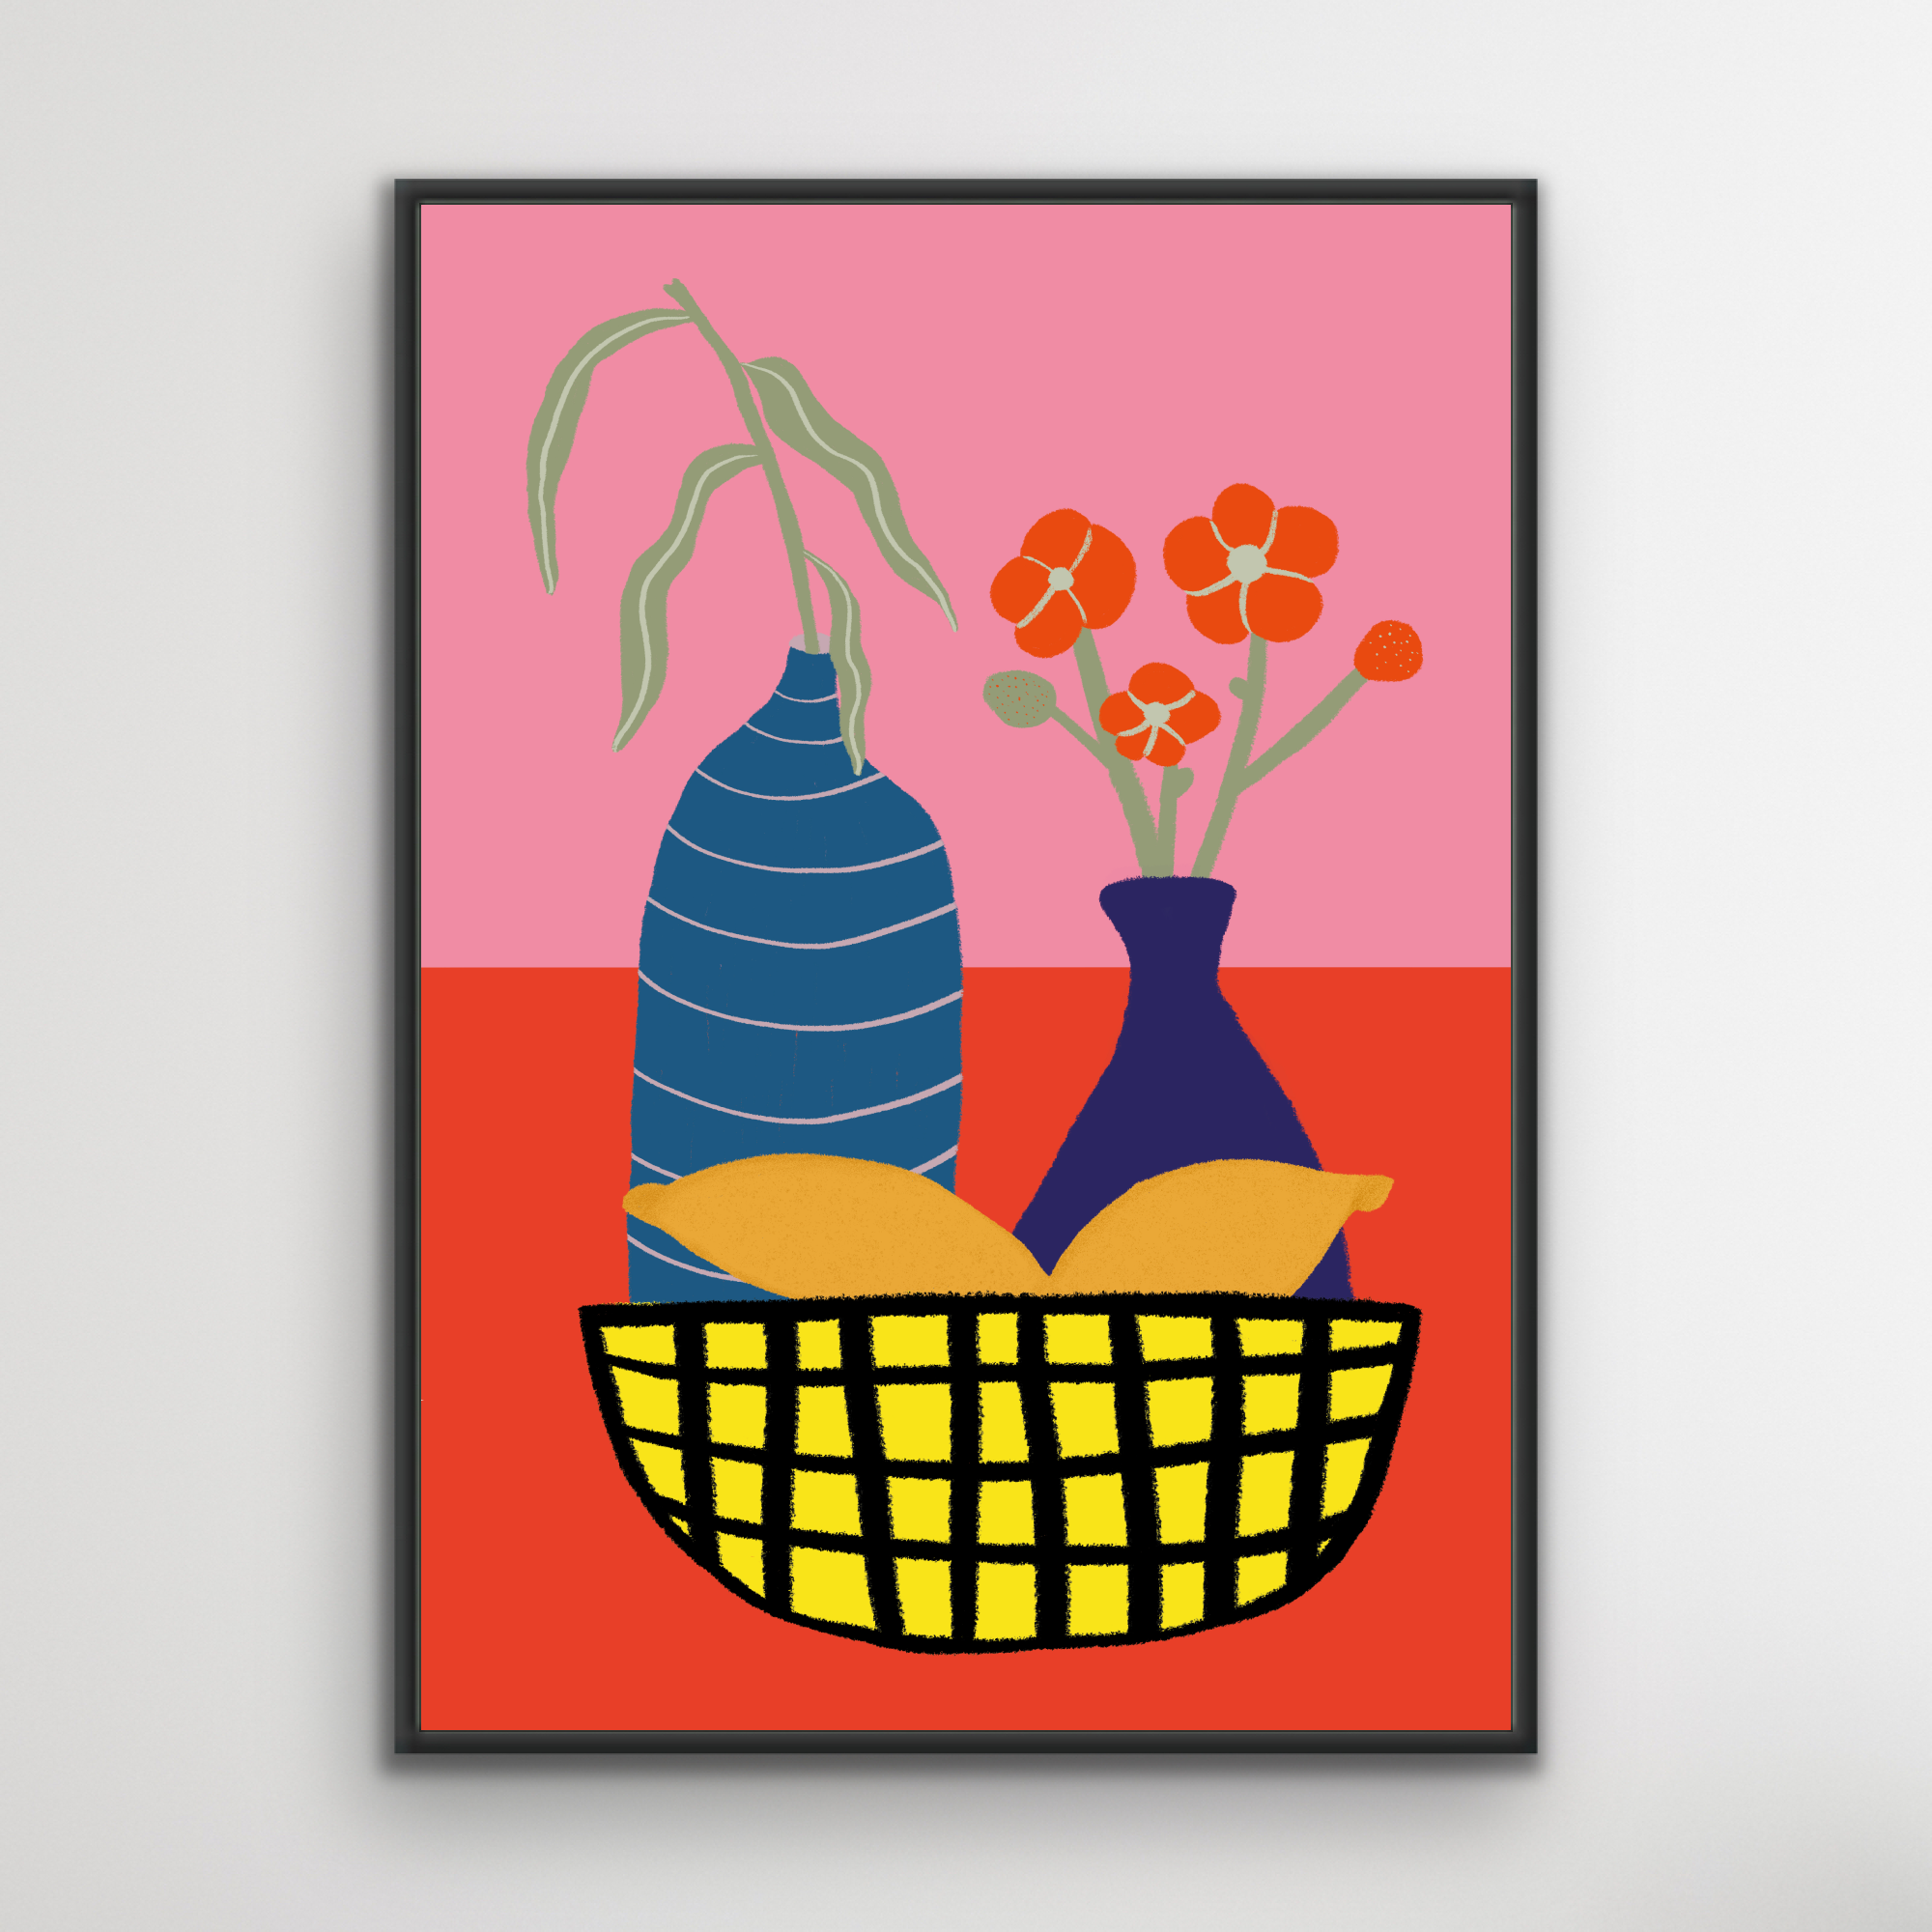 Poster: "Bowl Of Happiness"